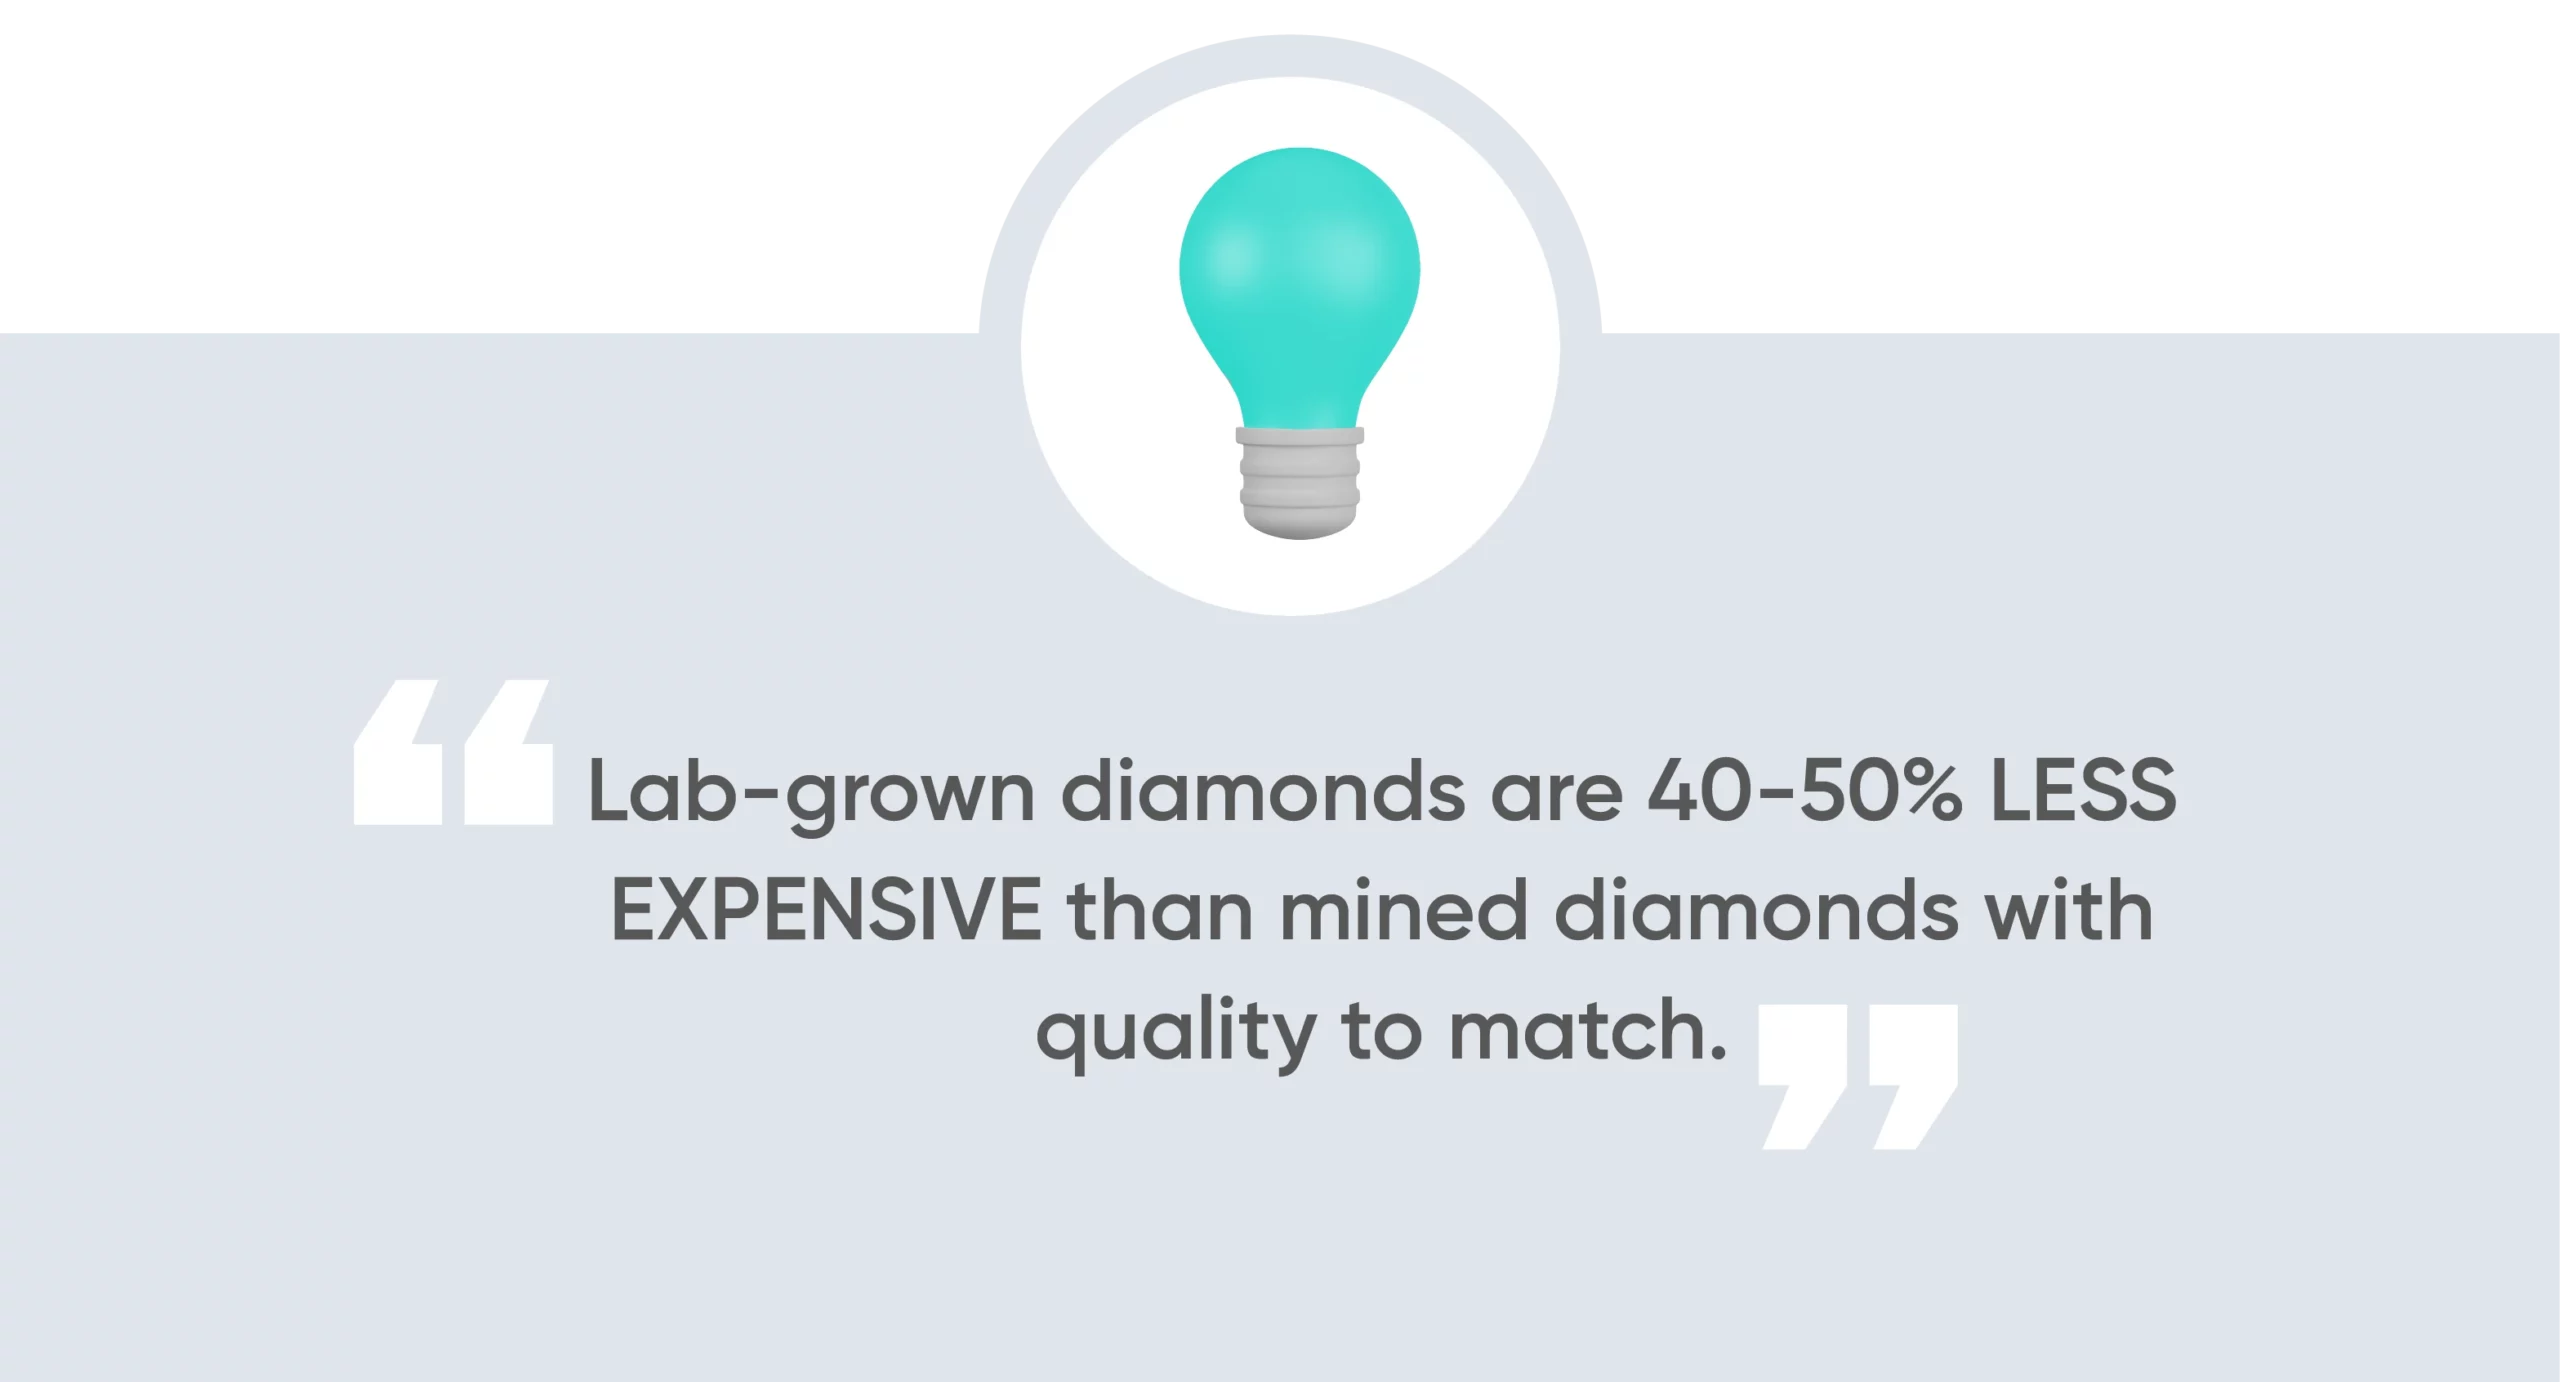 Lab-grown diamonds are 40-50% less expensive than mined diamonds with quality to match.